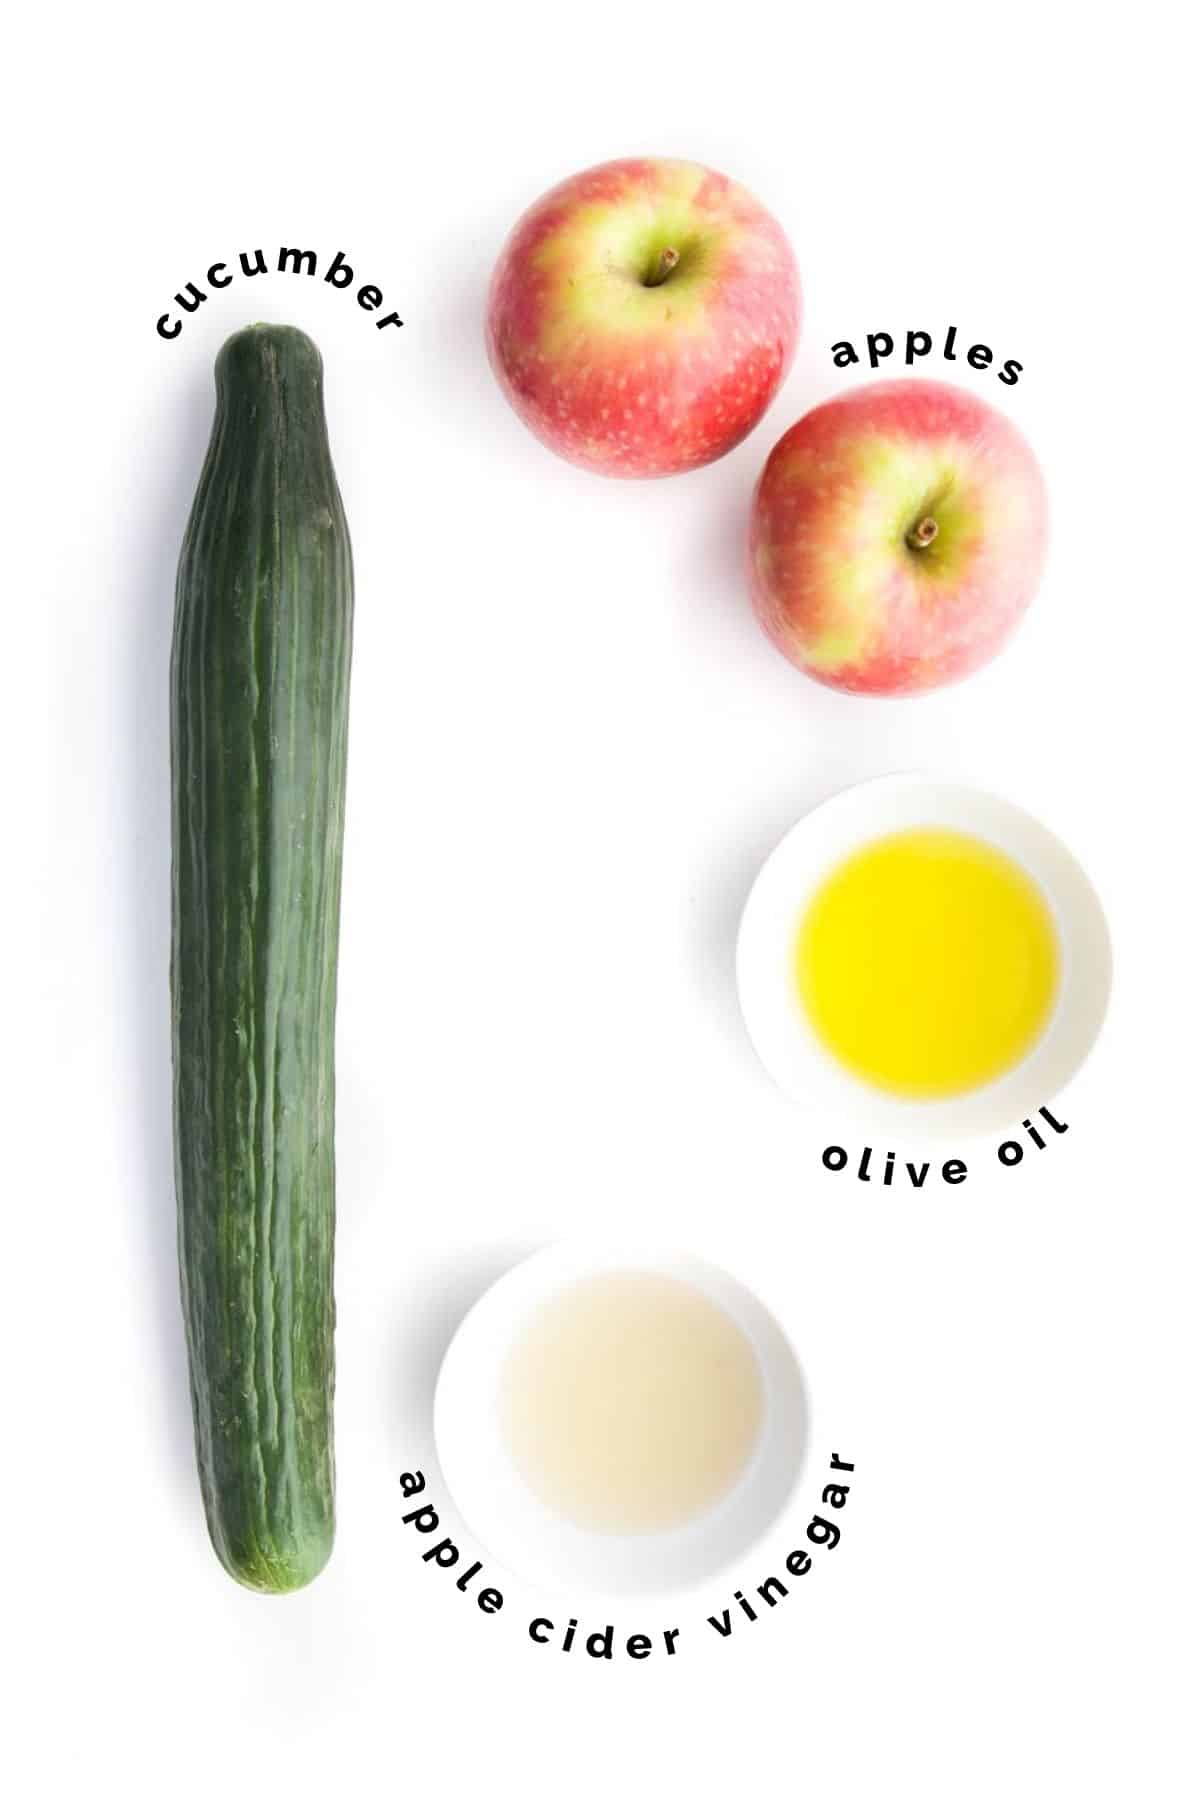 Labelled Ingredients Needed to Make Apple and Cucumber Salad